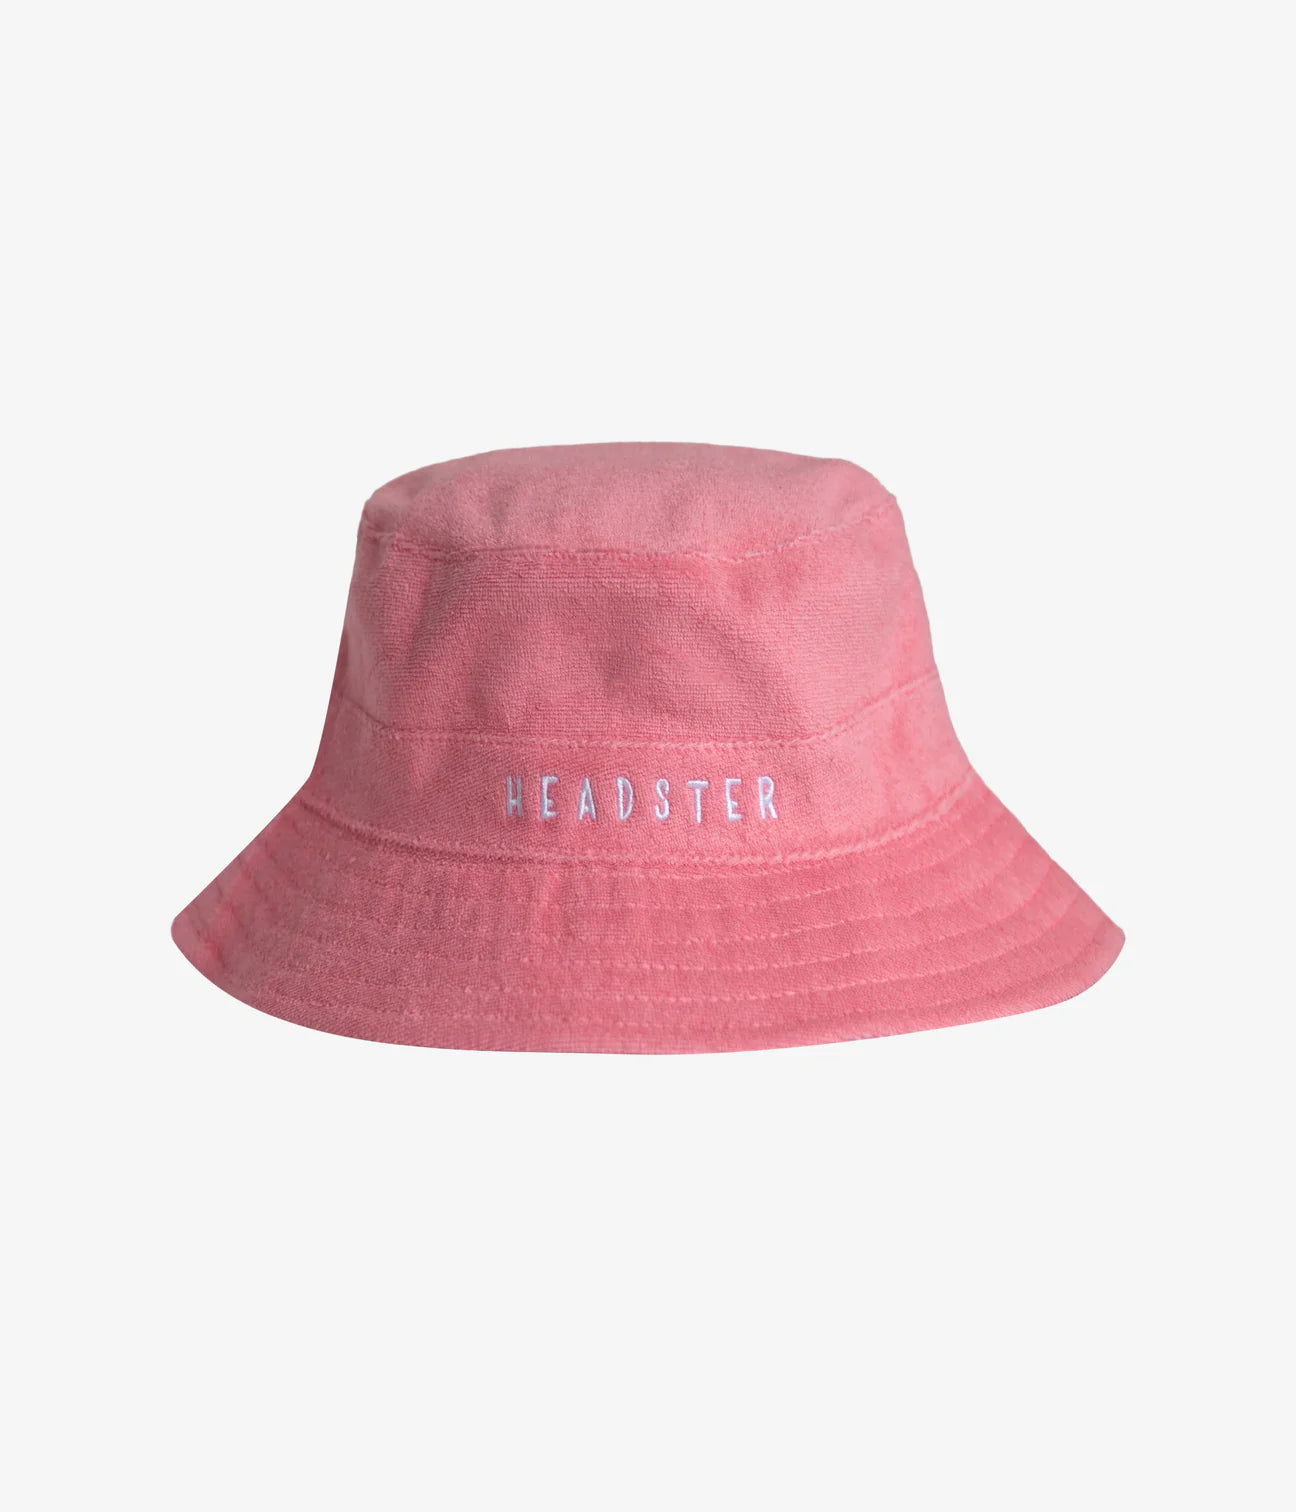 Check Yourself Bucket Hat - Peaches